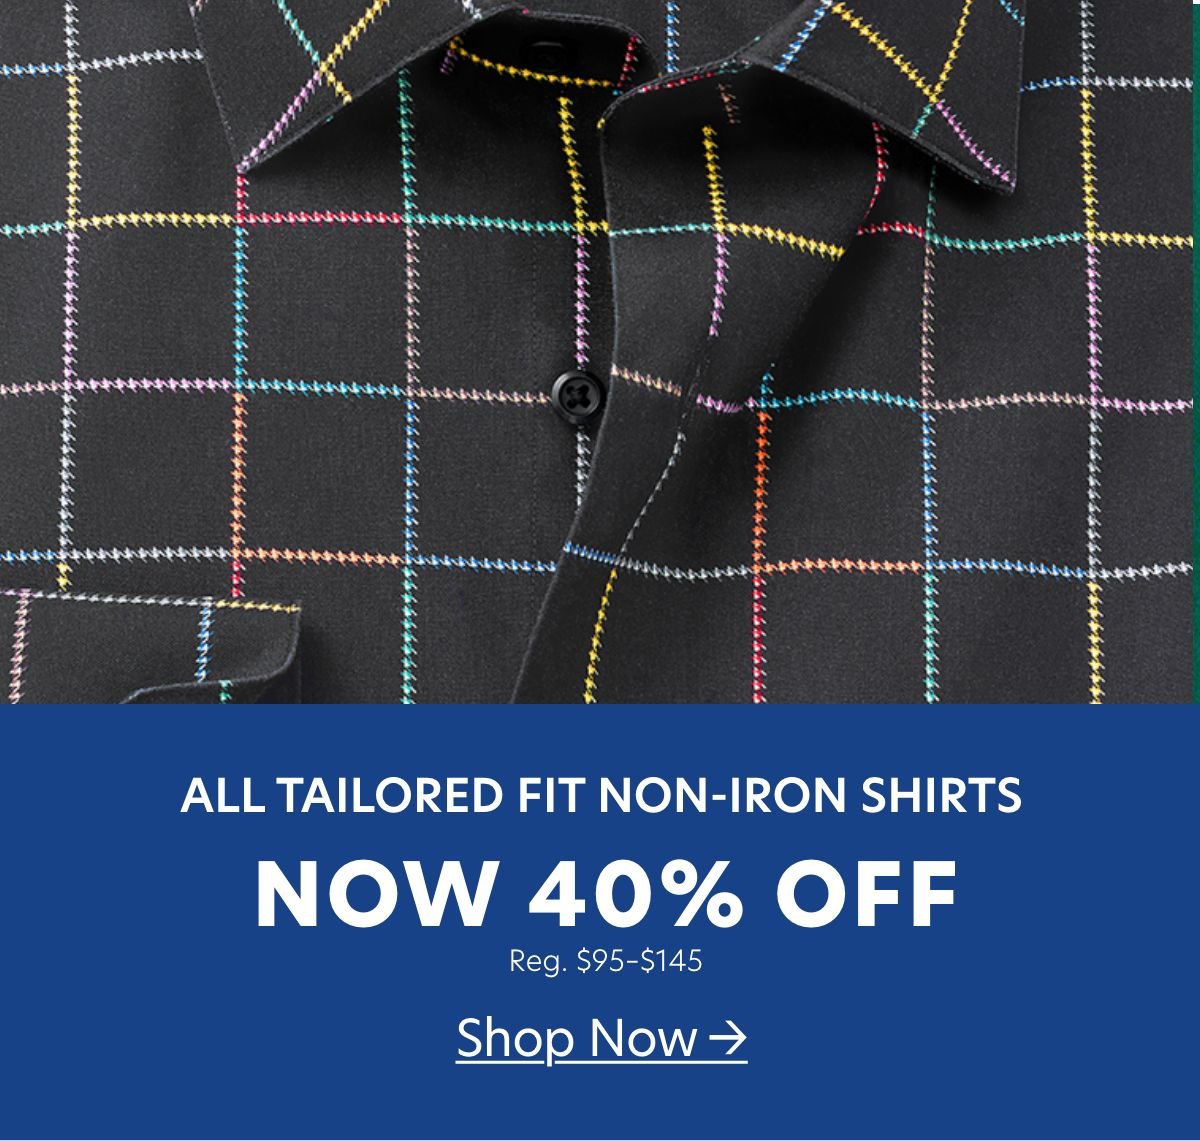 tailored fit non iron shirts now 40 off